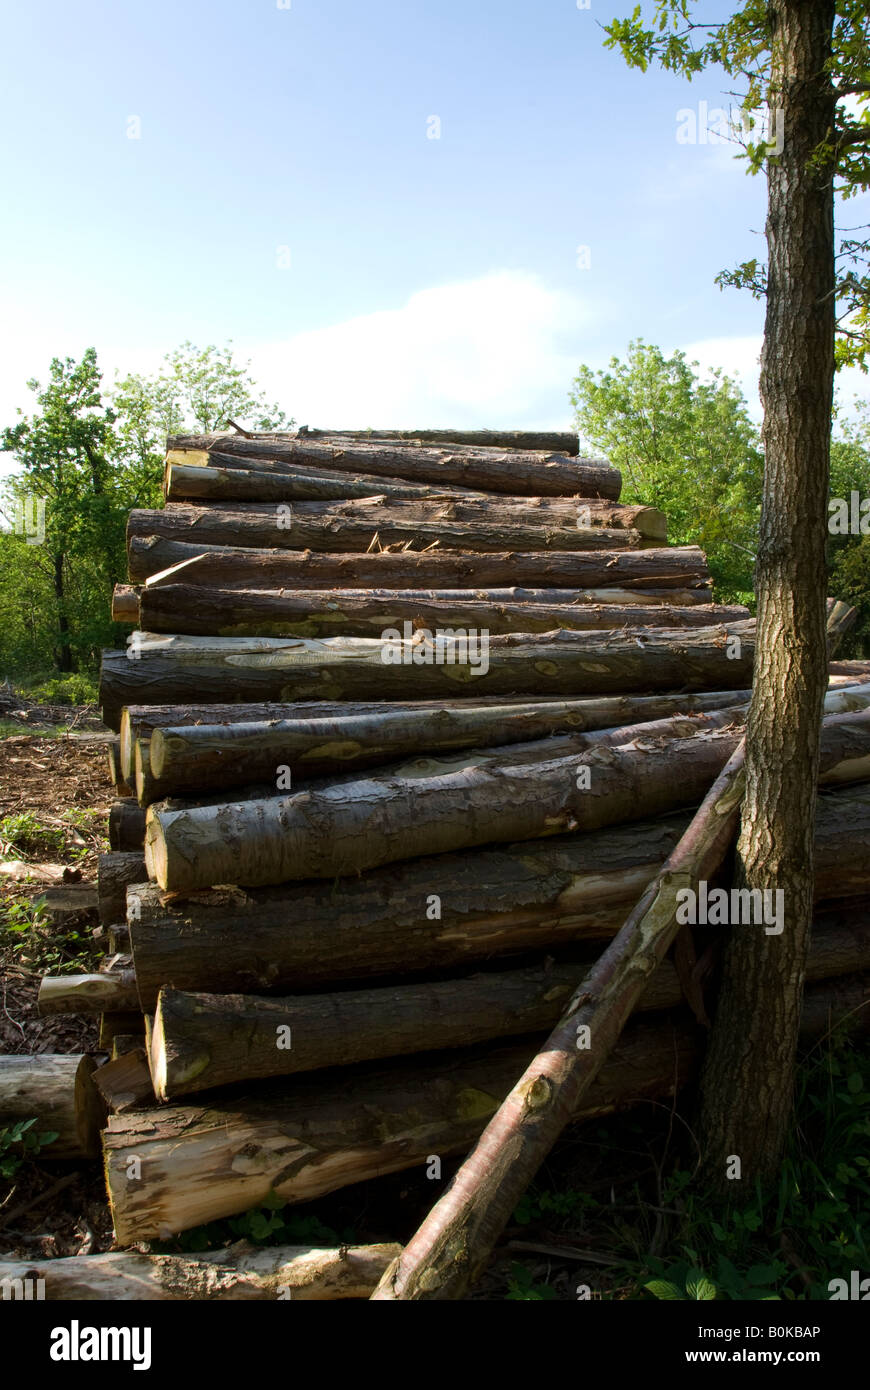 pile of timber Stock Photo